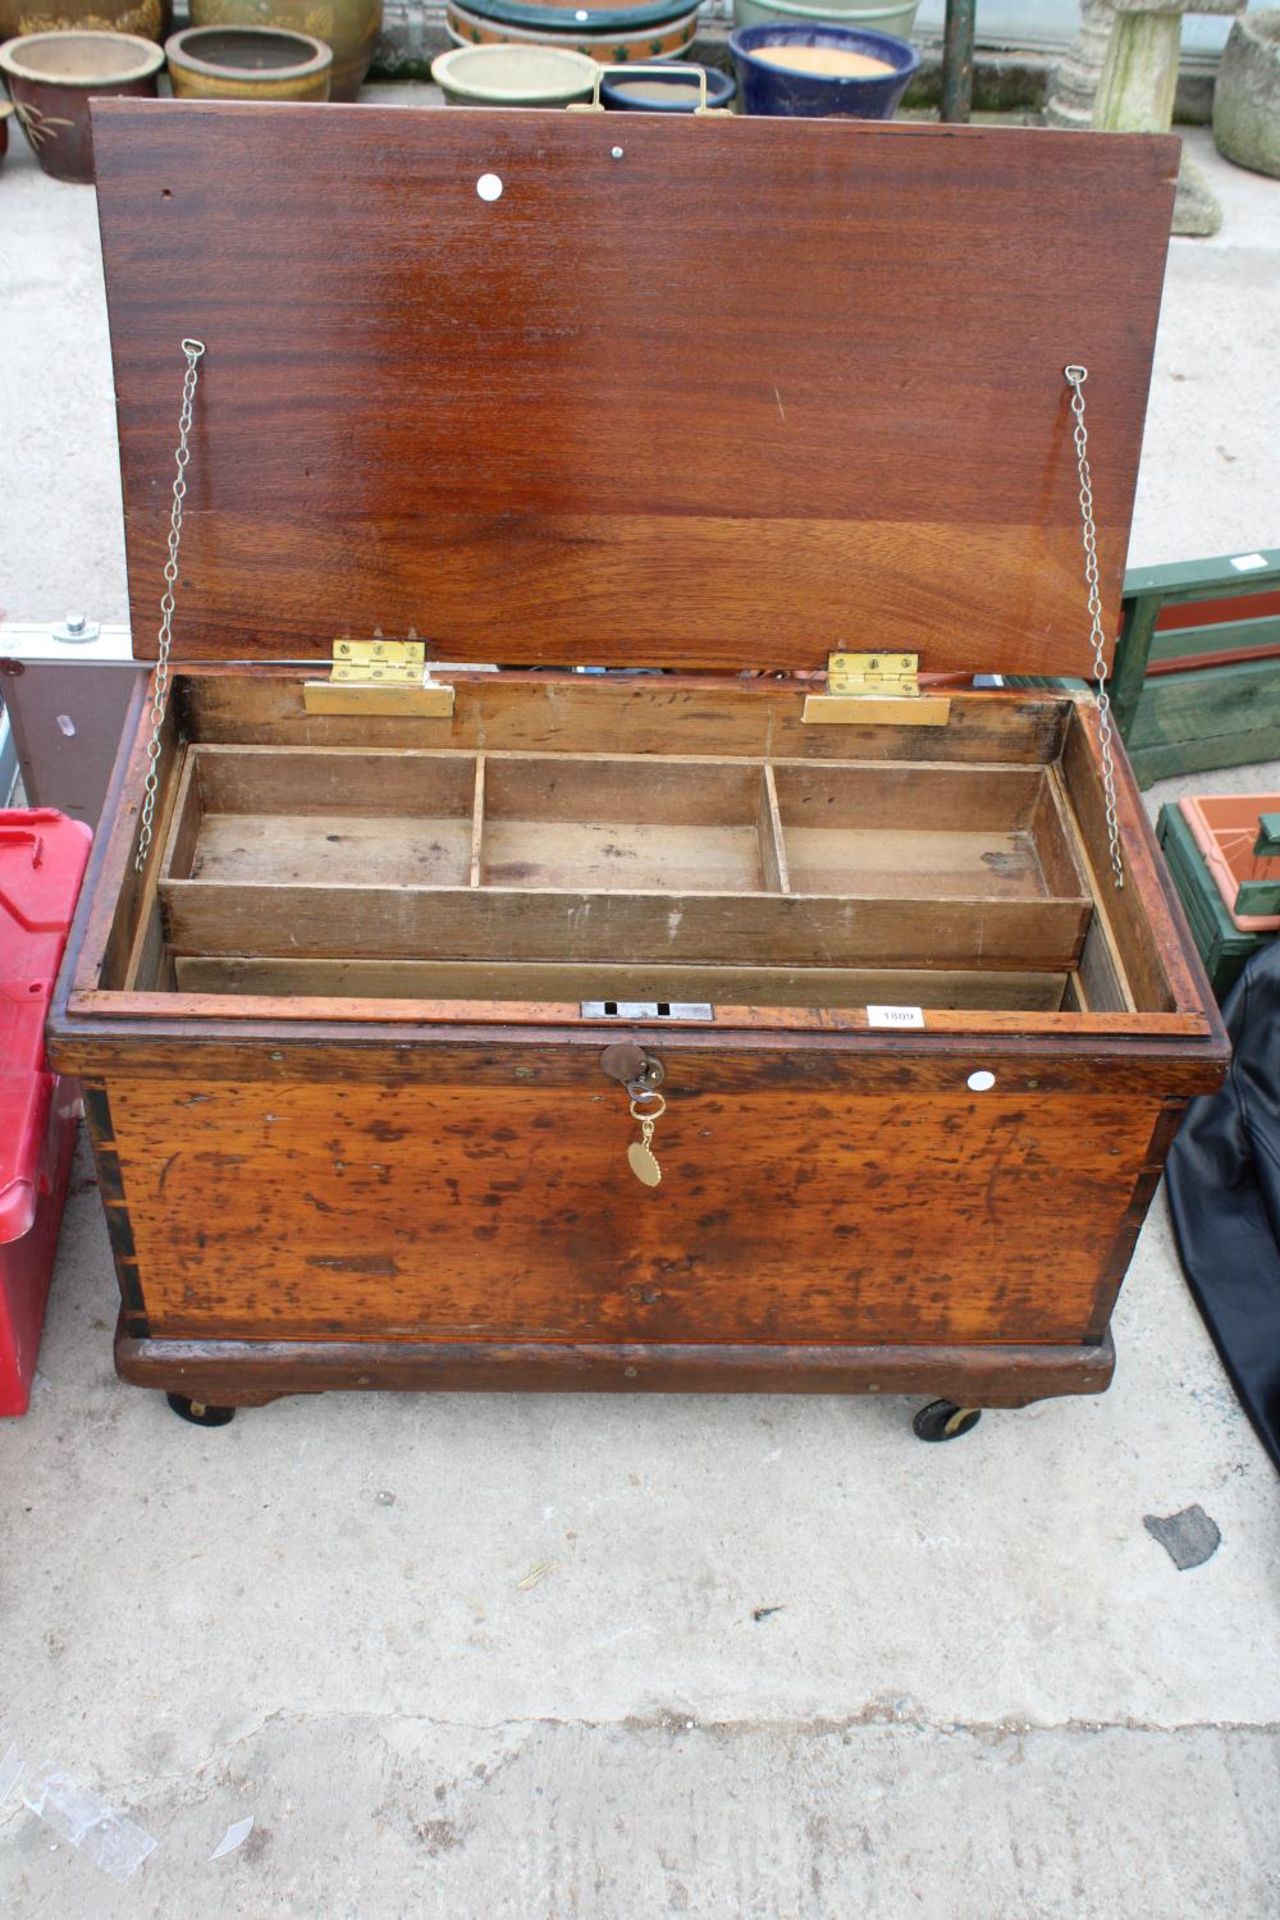 A VINTAGE WOODEN TOOL CHEST WITH FOUR WHEELS TO THE BASE